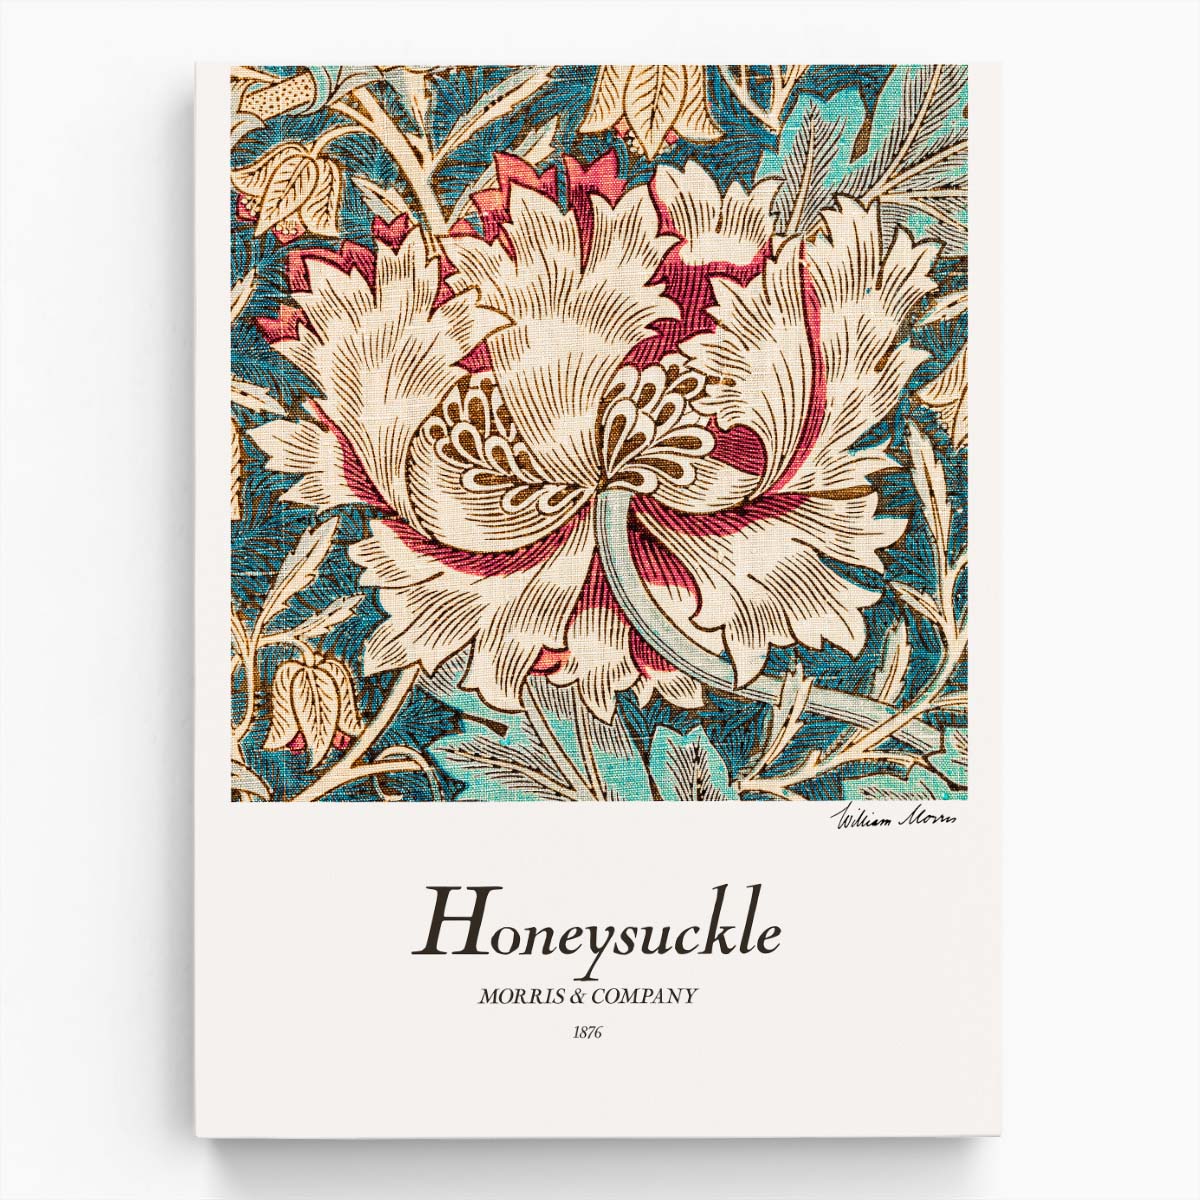 Vintage William Morris Honeysuckle Floral Illustration Wall Art Poster by Luxuriance Designs, made in USA